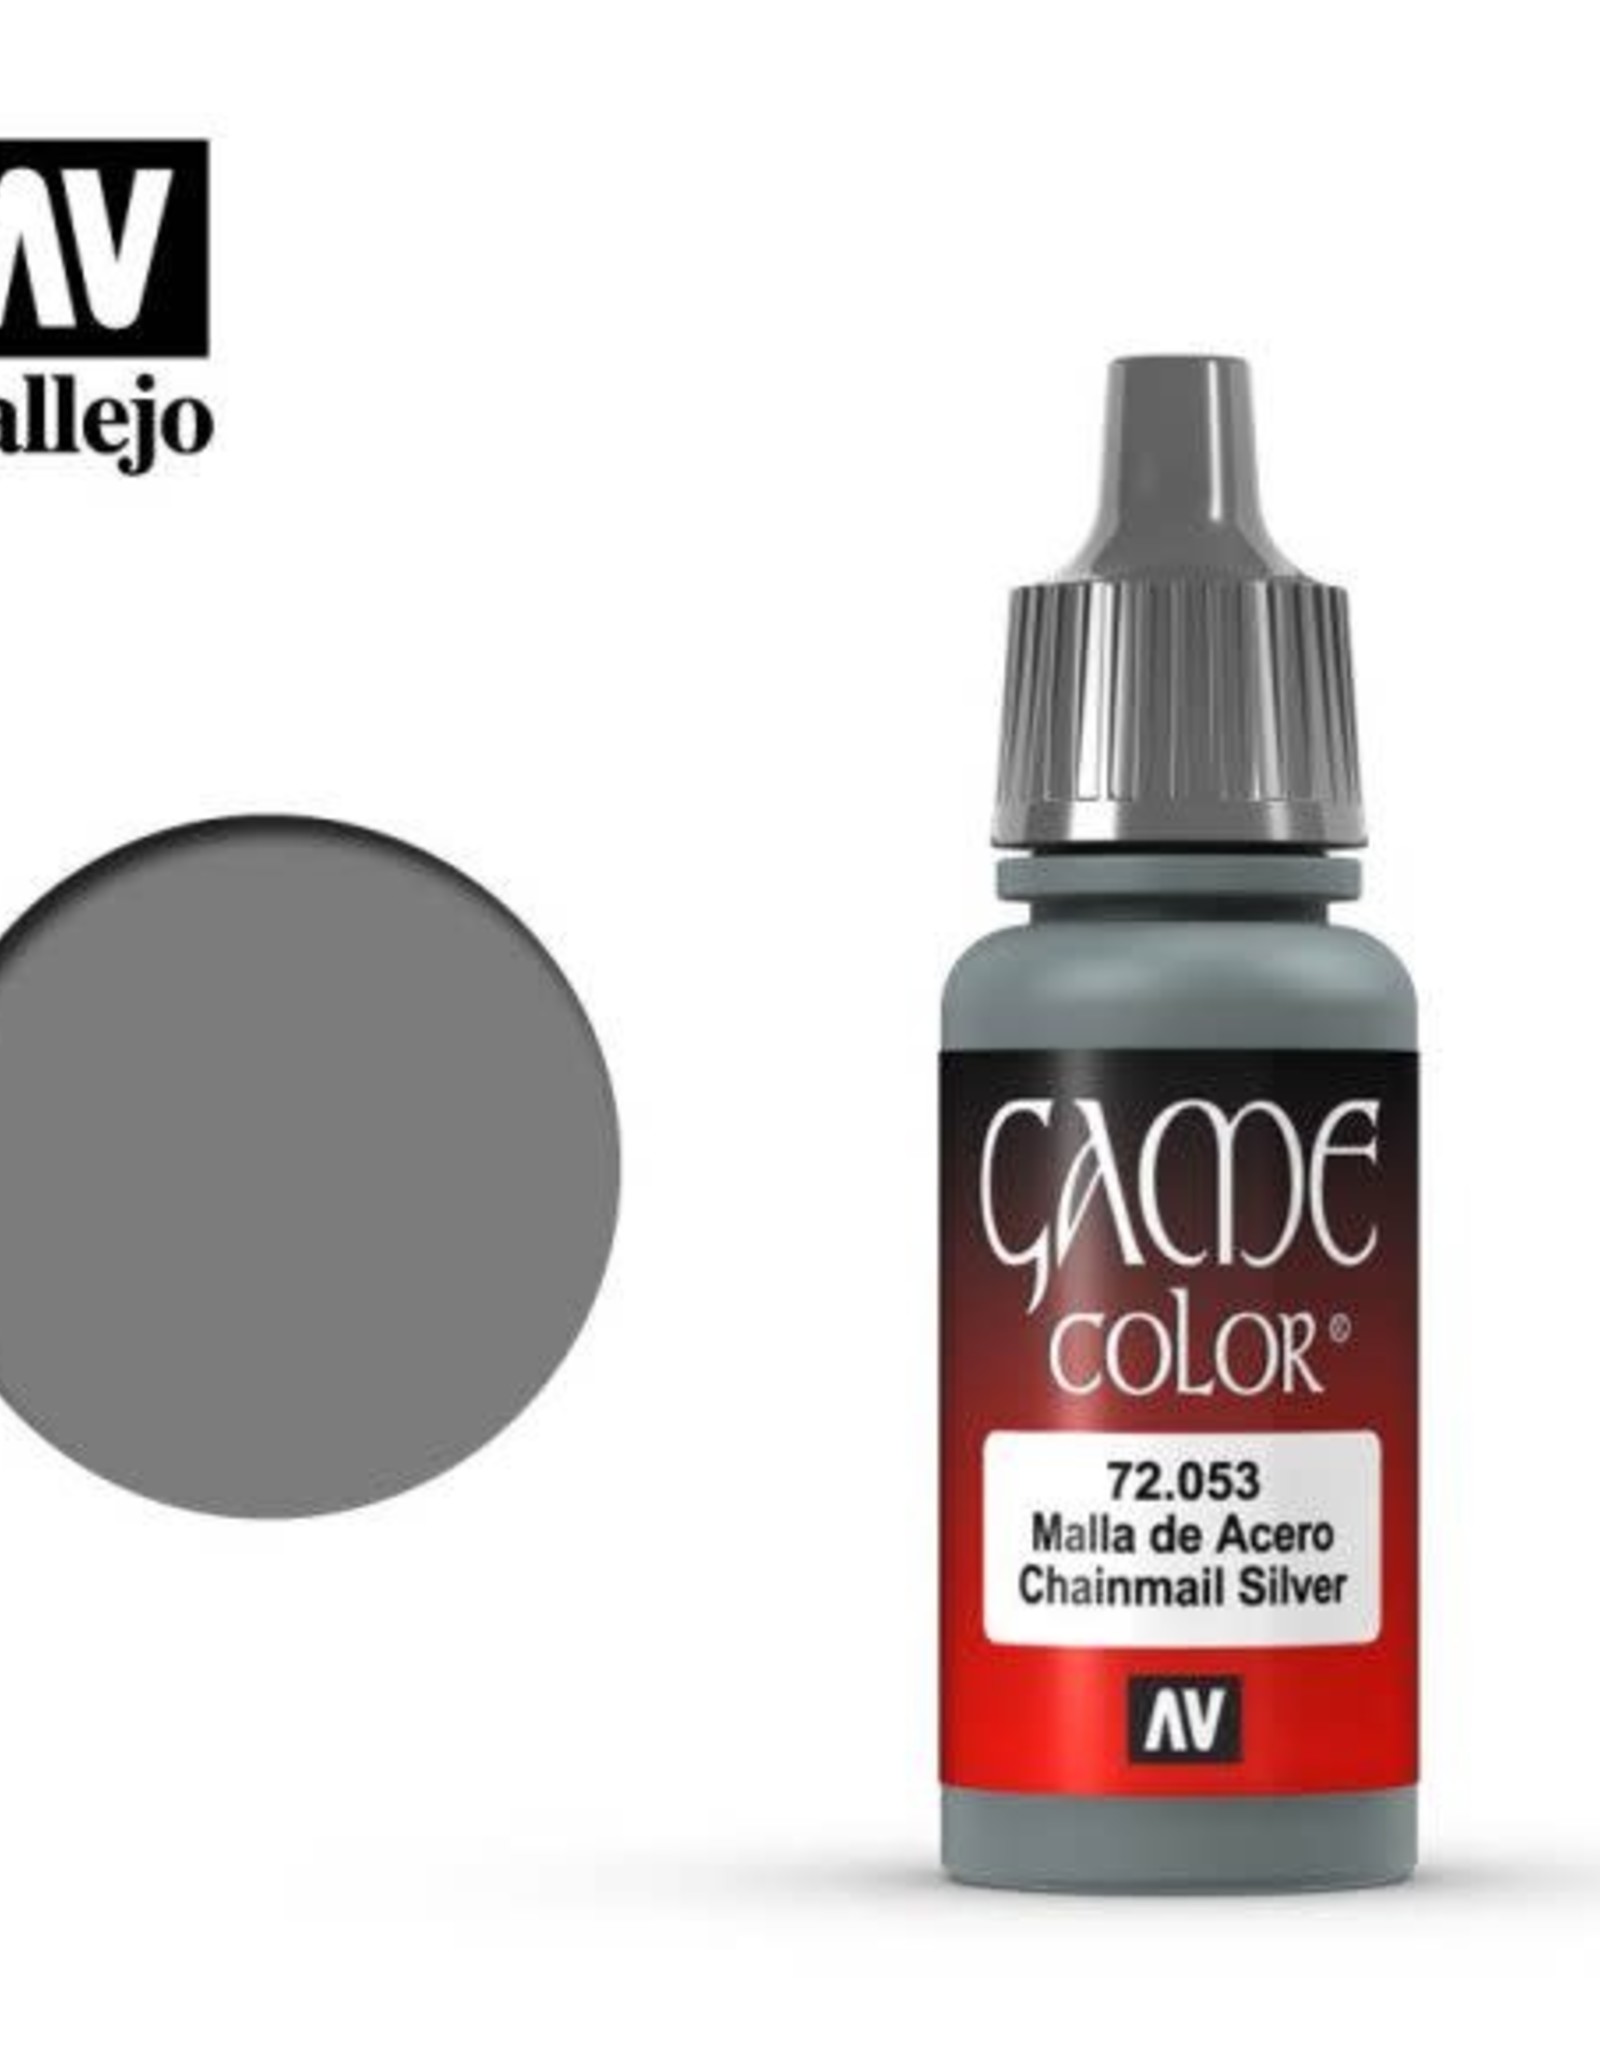 Acrylicos Vallejo AV GC: Chainmail Silver 72.053 (17 ml)